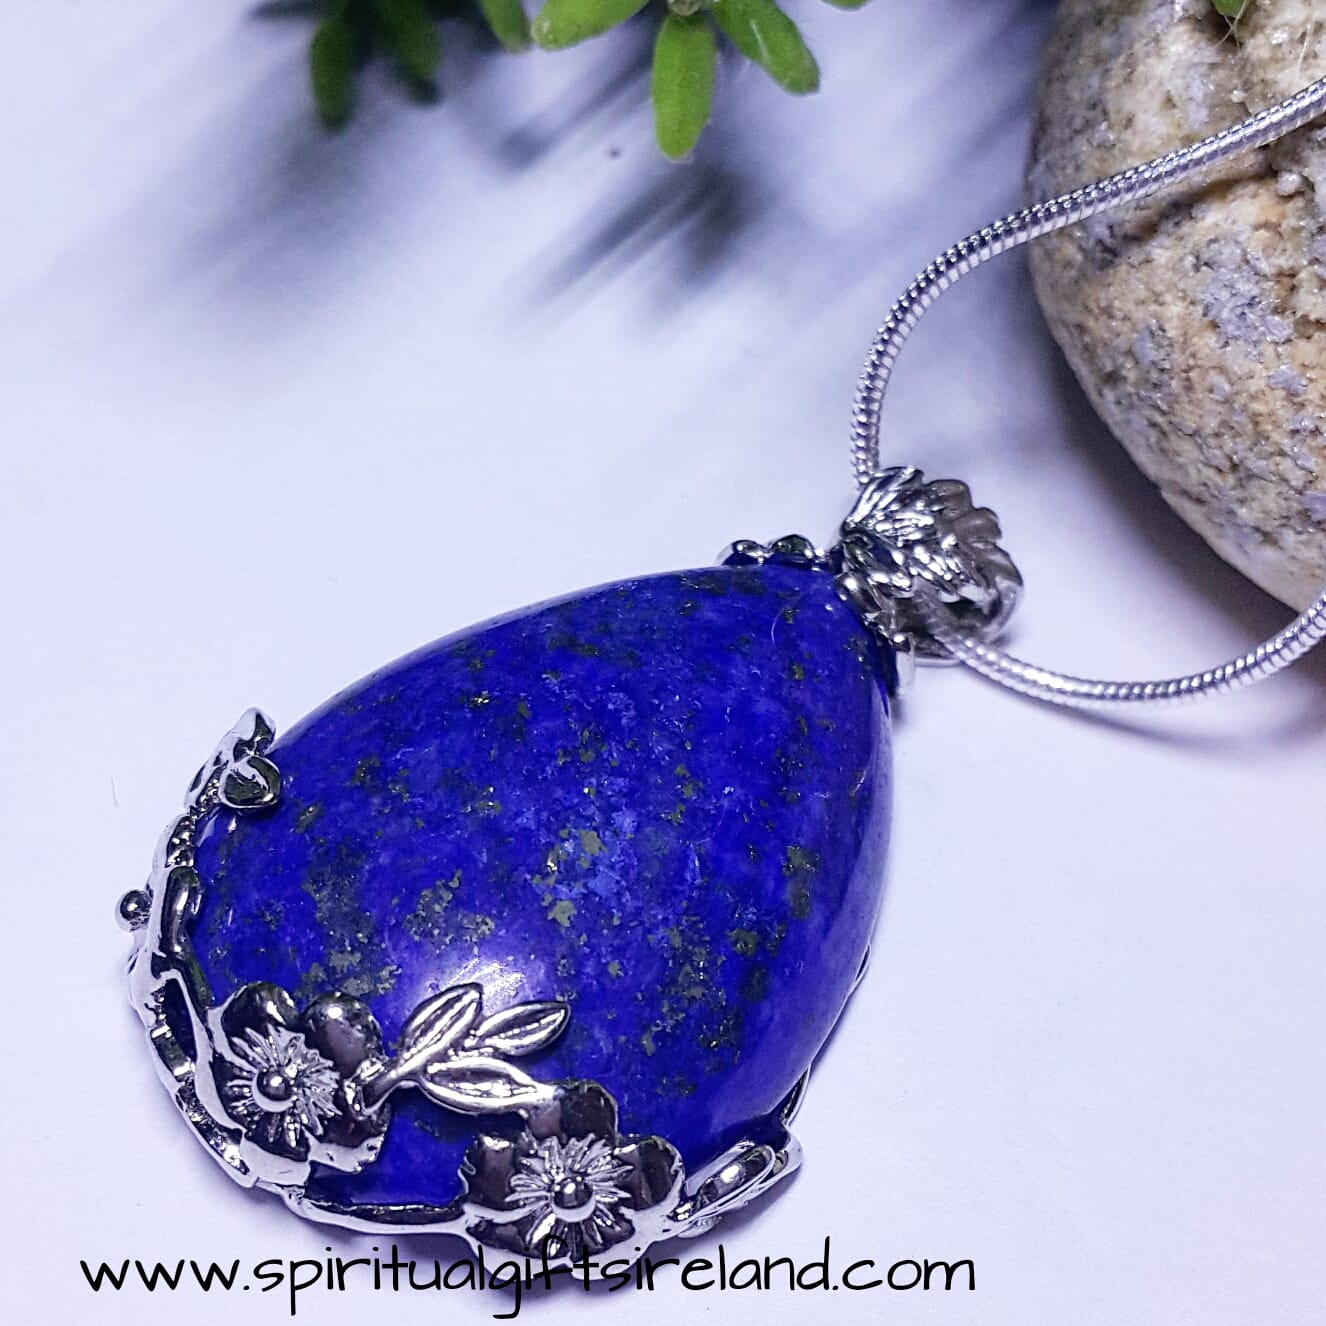 Gemstone Flower Mothers Day Floral Jewellery Floral Necklace Flower Necklace Gemstone Jewellery Sodalite Necklace Flower Jewellery,